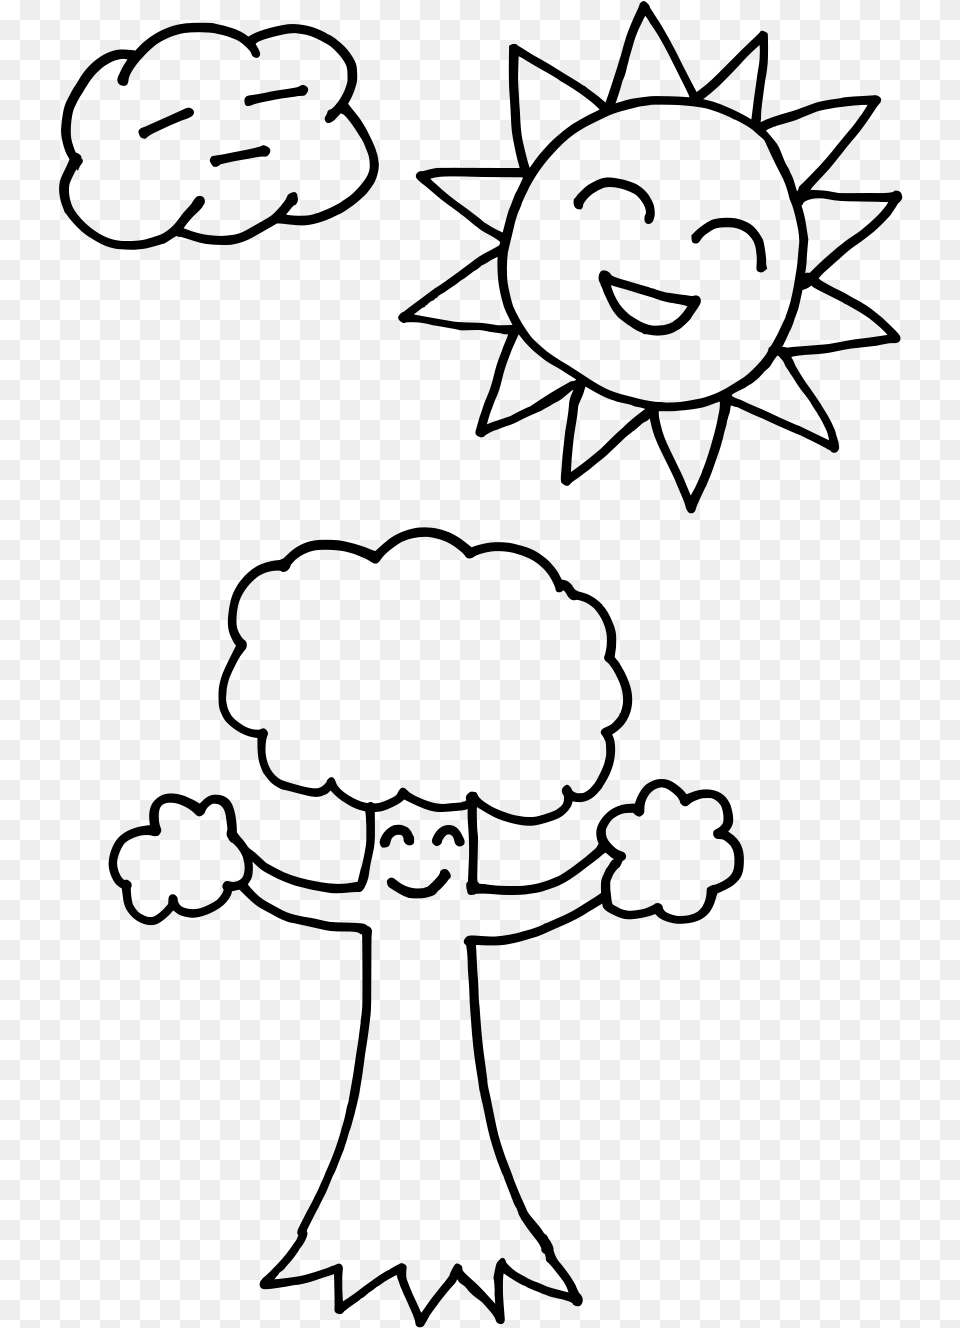 Coloring Pages Of Trees And Sun Download Sun And Cloud Coloring Pages, Gray Png Image